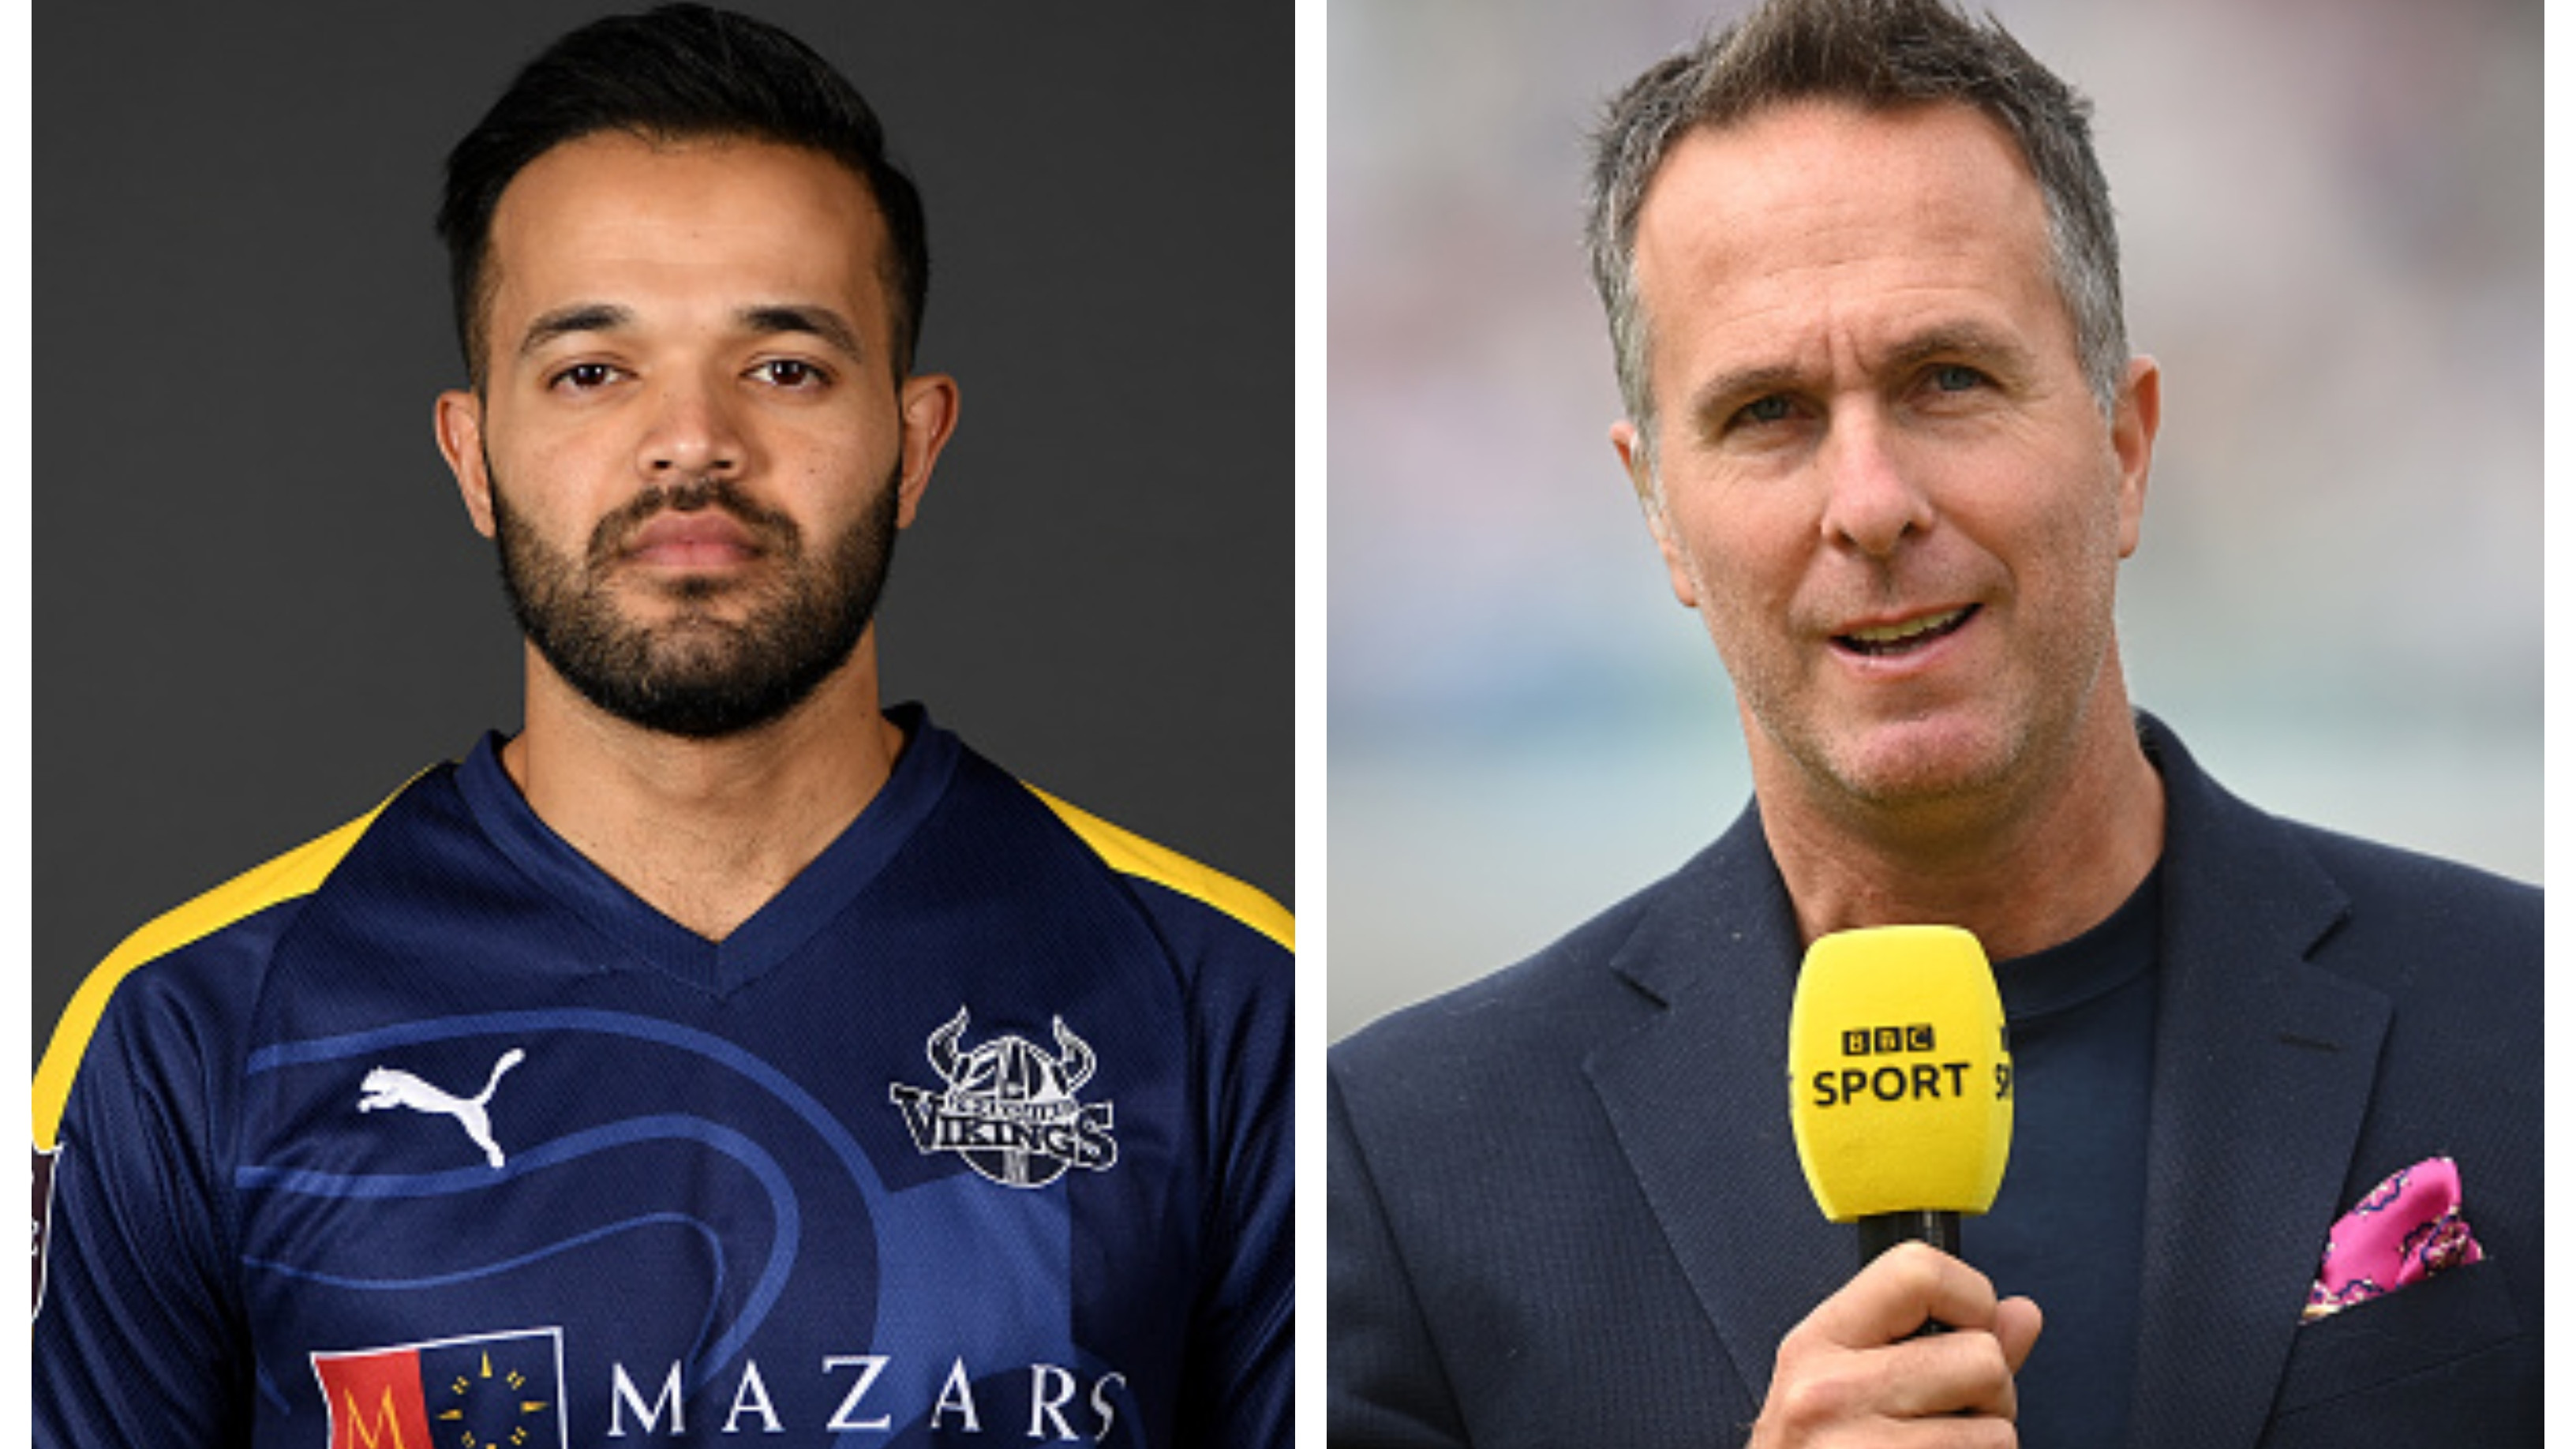 Michael Vaughan accused of racism by Azeem Rafiq; former England captain rubbishes allegations